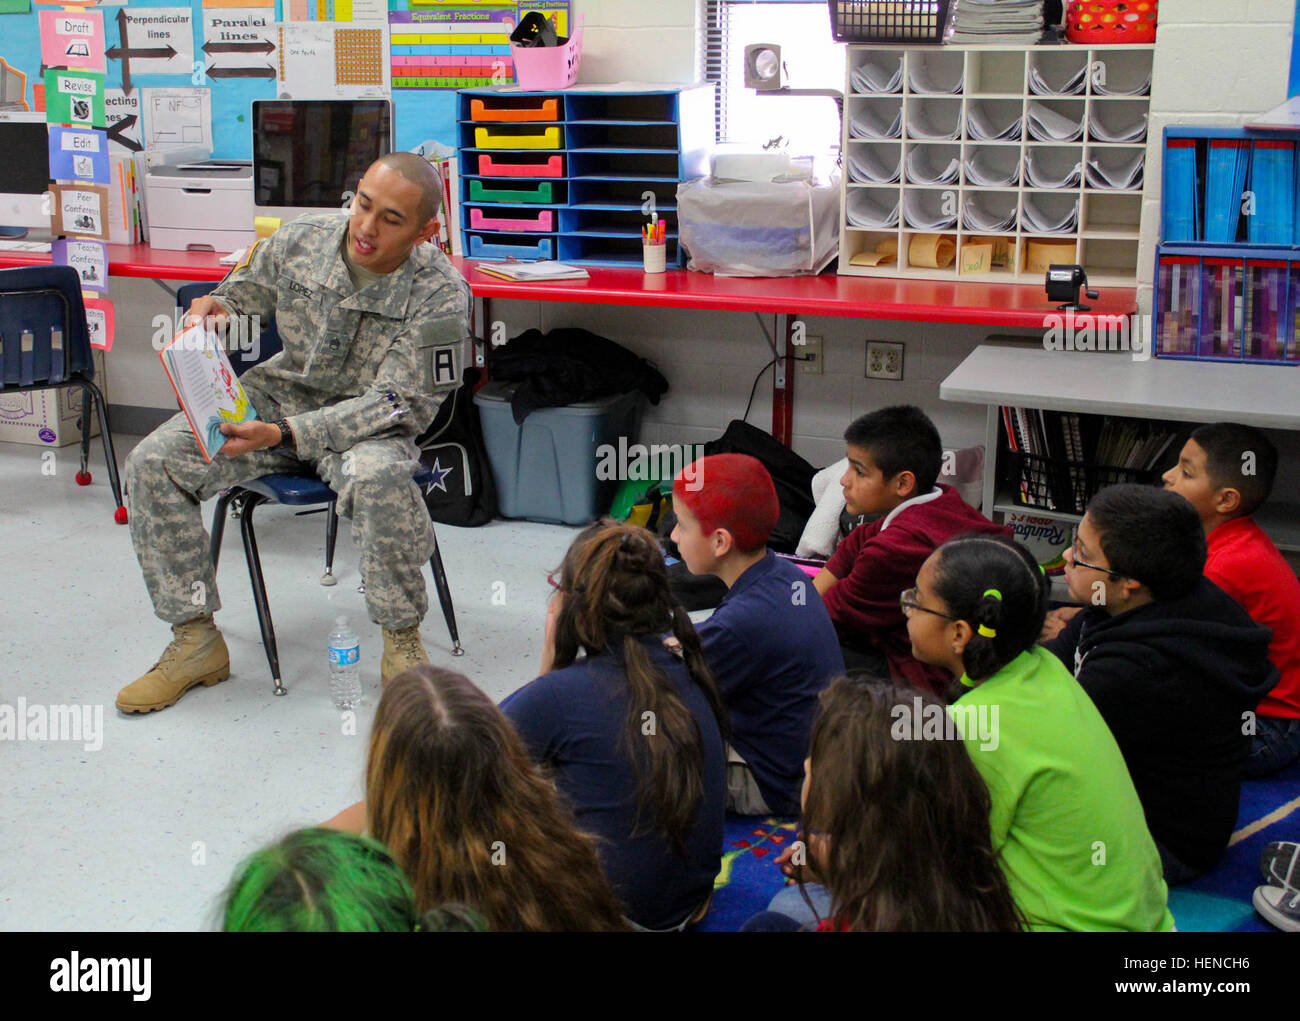 Staff Sgt. Alsherdan Lopez, a noncommissioned officer with the 402nd Field Artillery Brigade, reads the book 'Green Eggs and Ham' by Dr. Seuss to the students of Presa Elementary School, March 6 in El Paso, Texas. The school celebrated the Read Across America event all week and encouraged creativity with themed days. On March 5, the theme was wacky hair Wednesday, where students came to school with colored and styled hair like the characters in their favorite Dr. Seuss books. (Photo by 1st Lt. Vanessa Dudley, 1st Battalion, 361st Regiment, 5th Armored Brigade, Division West Public Affairs) 402 Stock Photo